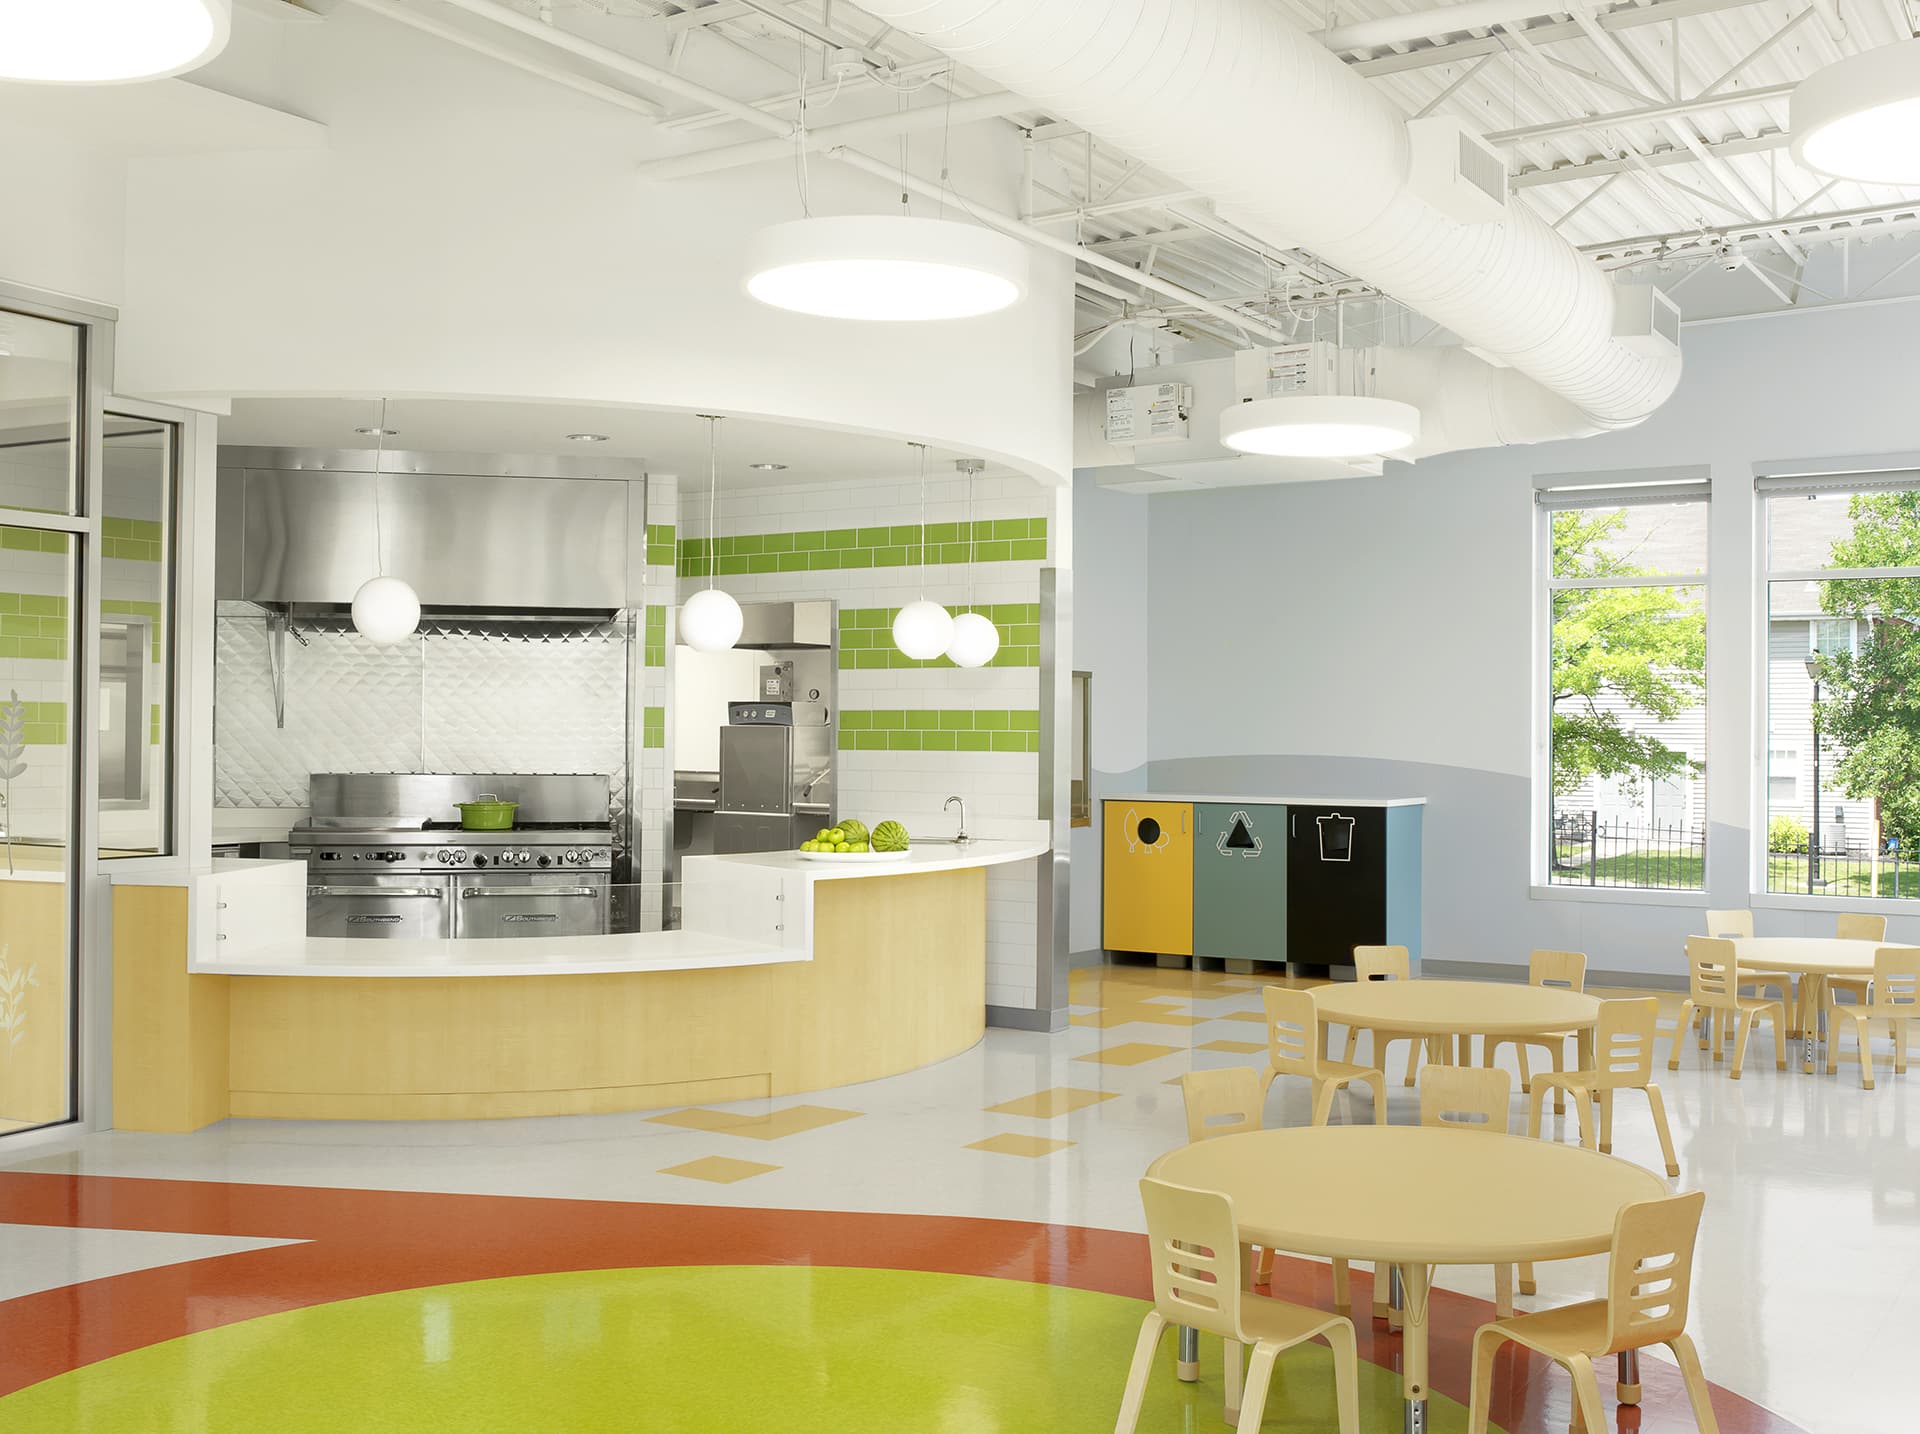 interior lunchroom of early childhood school designed by trivers architectural firm